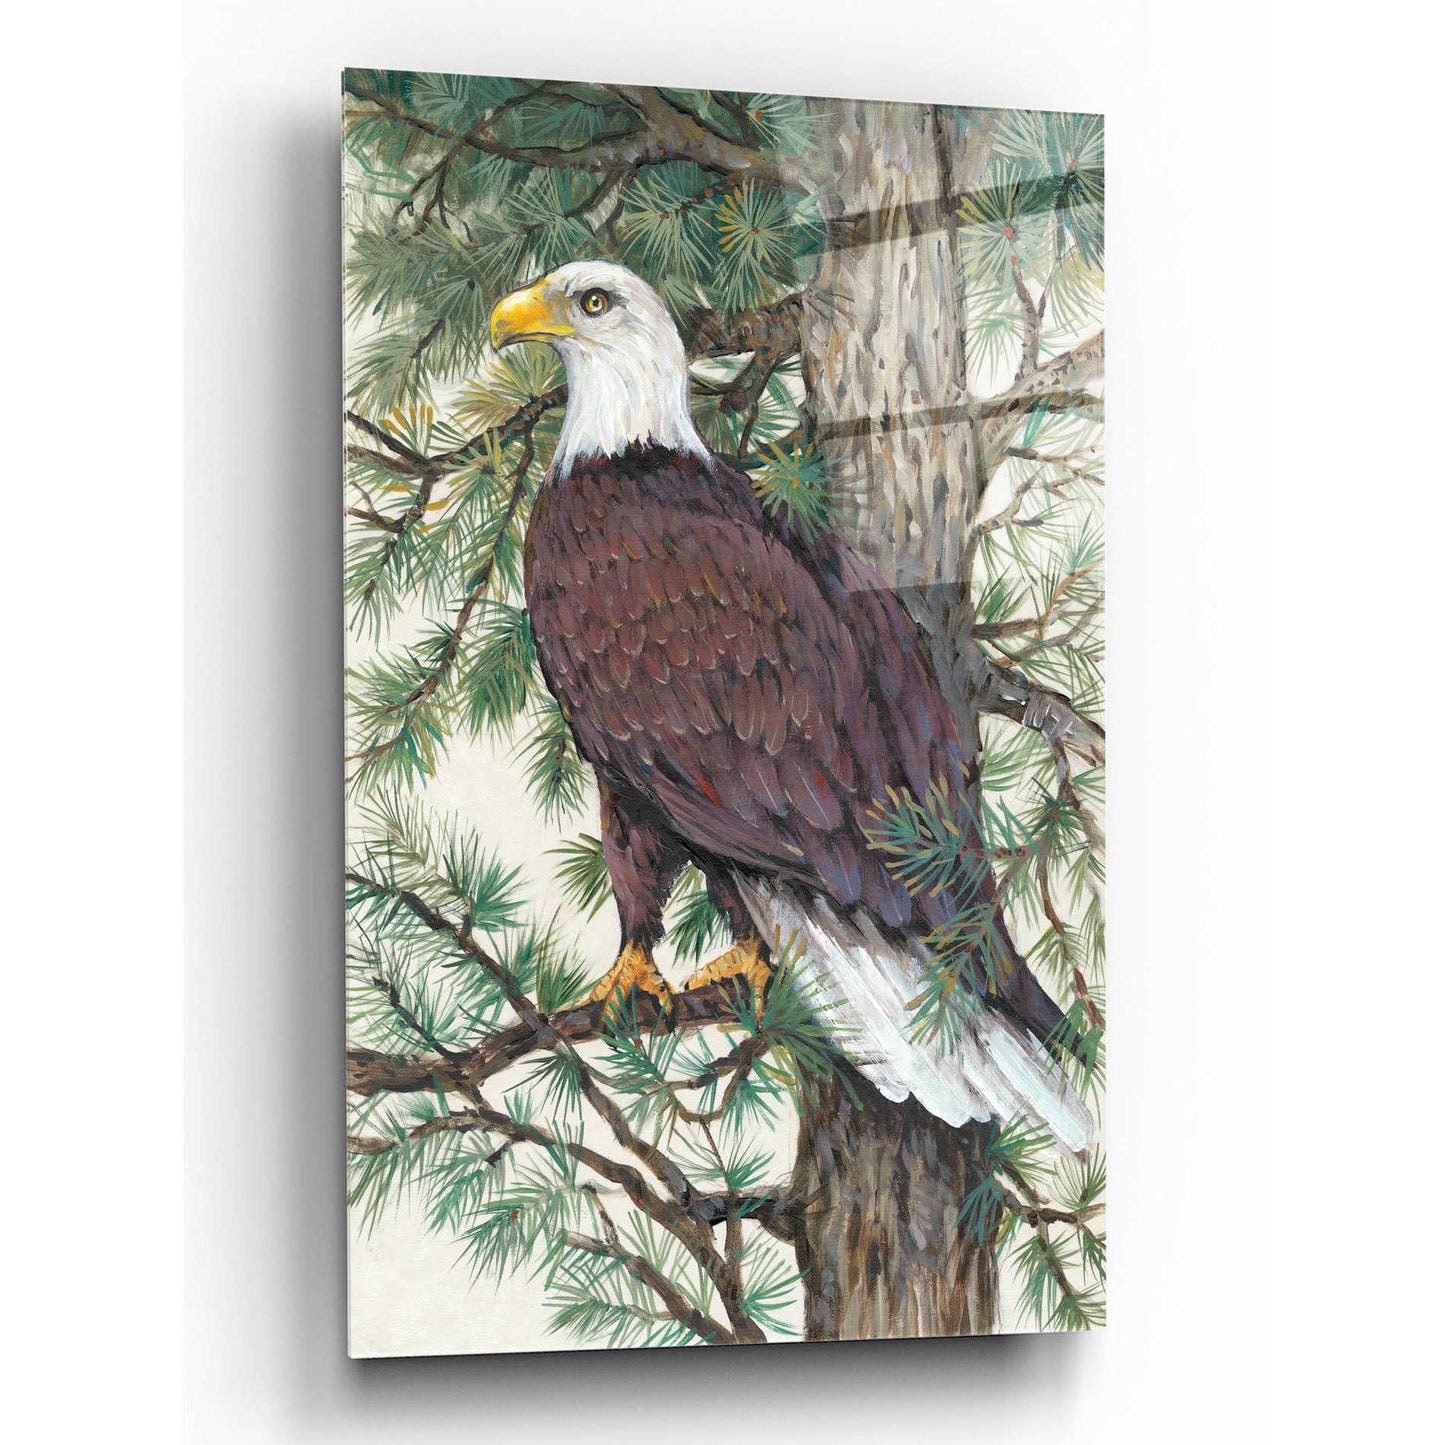 Epic Art 'Eagle in the Pine' by Tim O'Toole, Acrylic Glass Wall Art,16x24